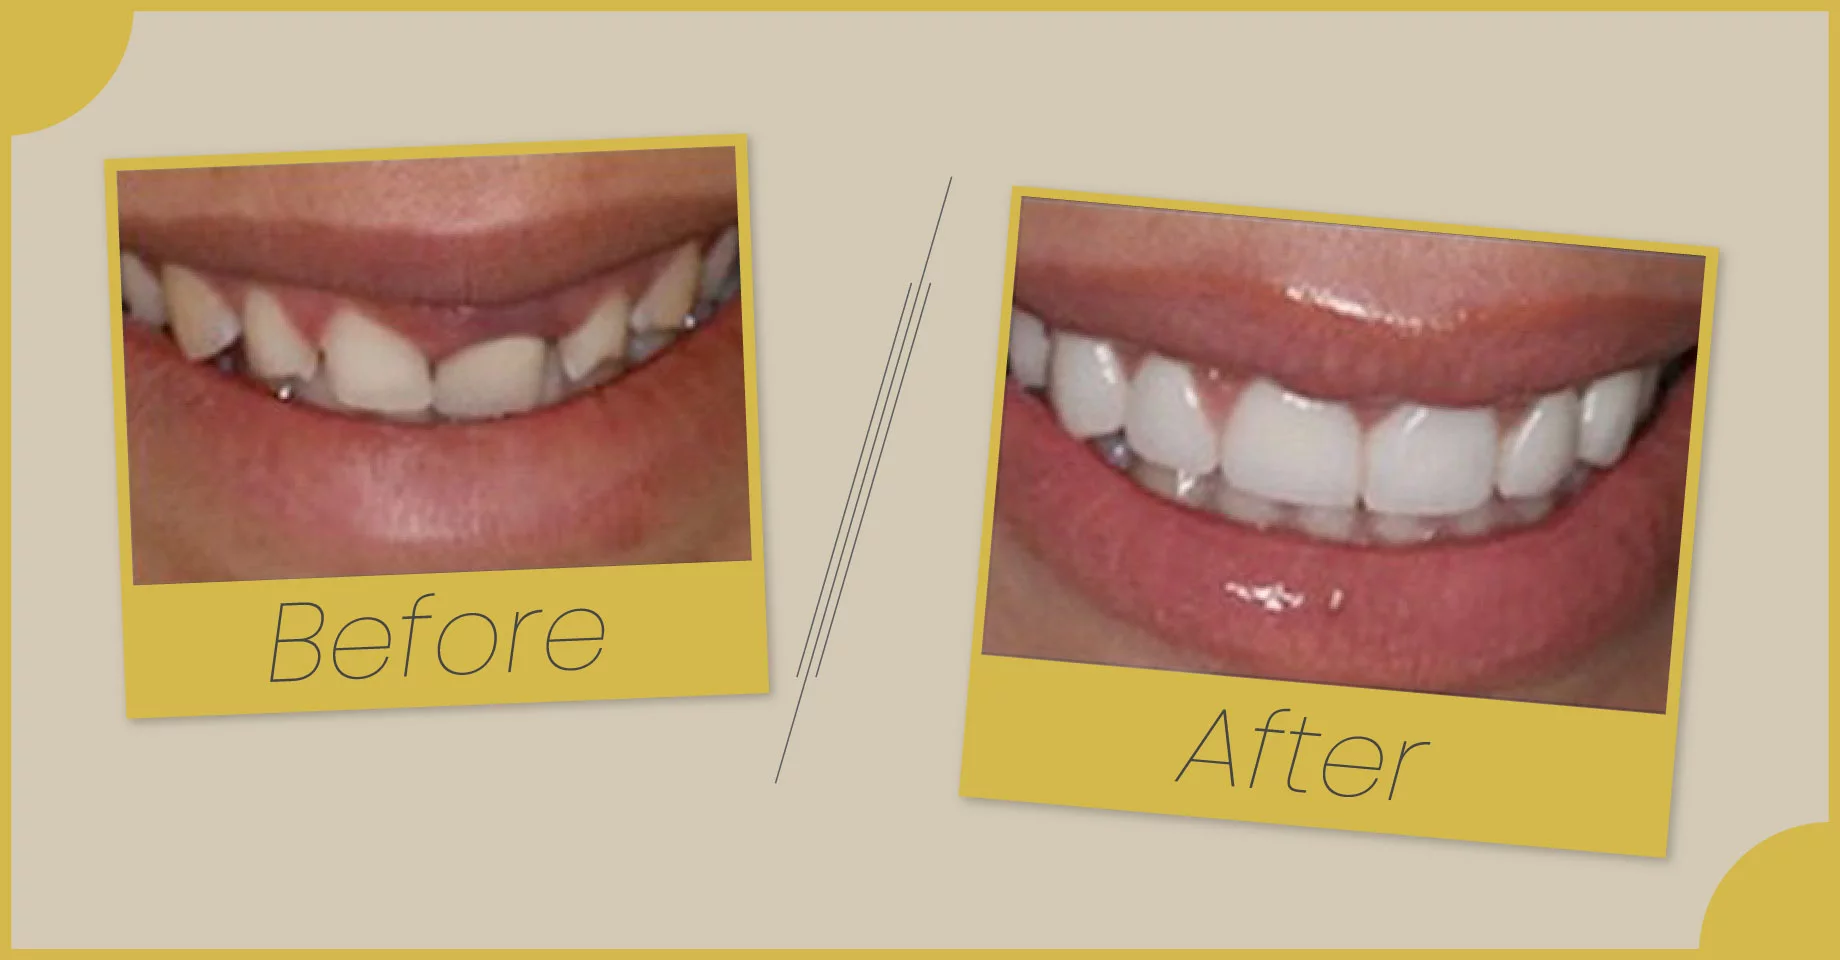 Before and After Images of Dental Care at Smile Saver Dental